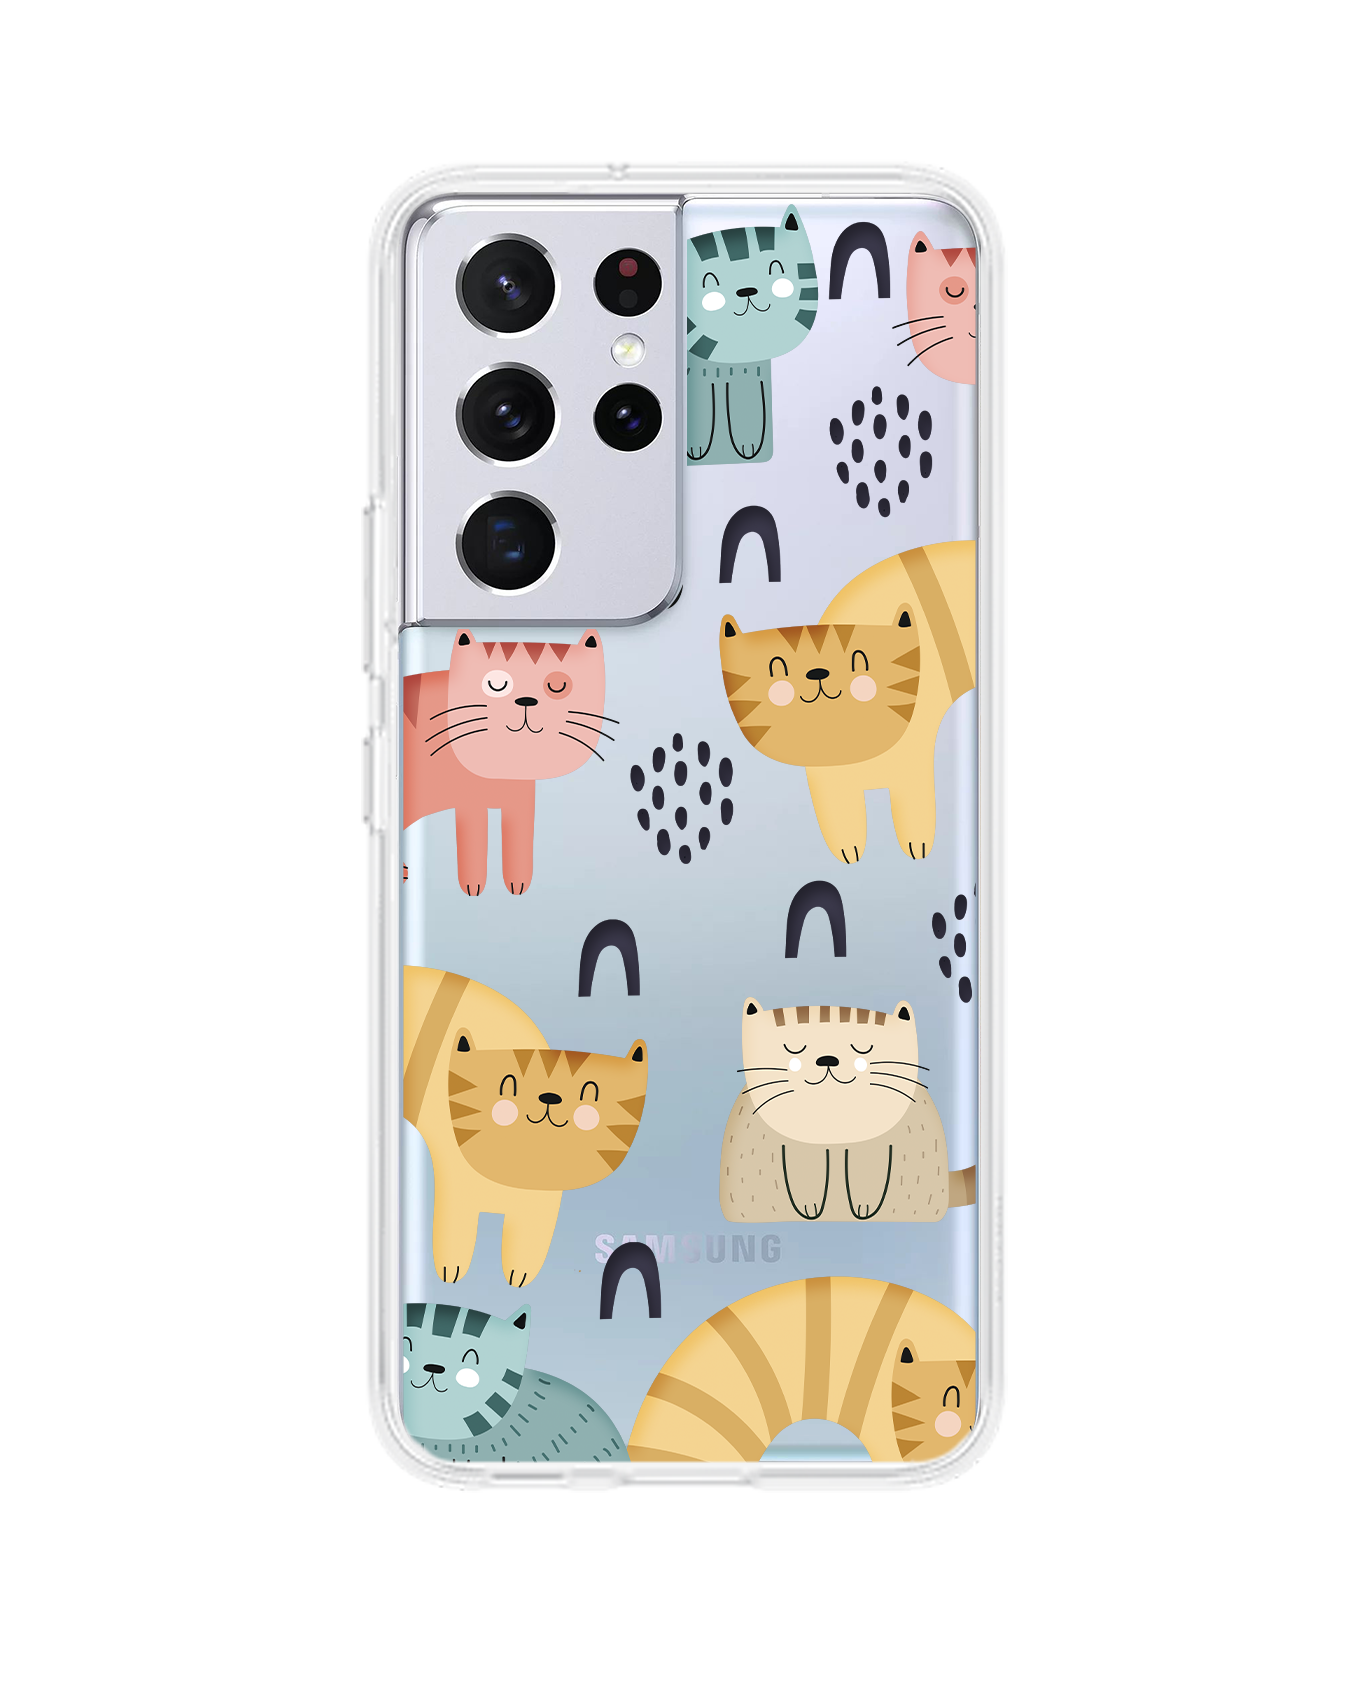 Android Rearguard Hybrid Case - Rainbow Meow 1.0